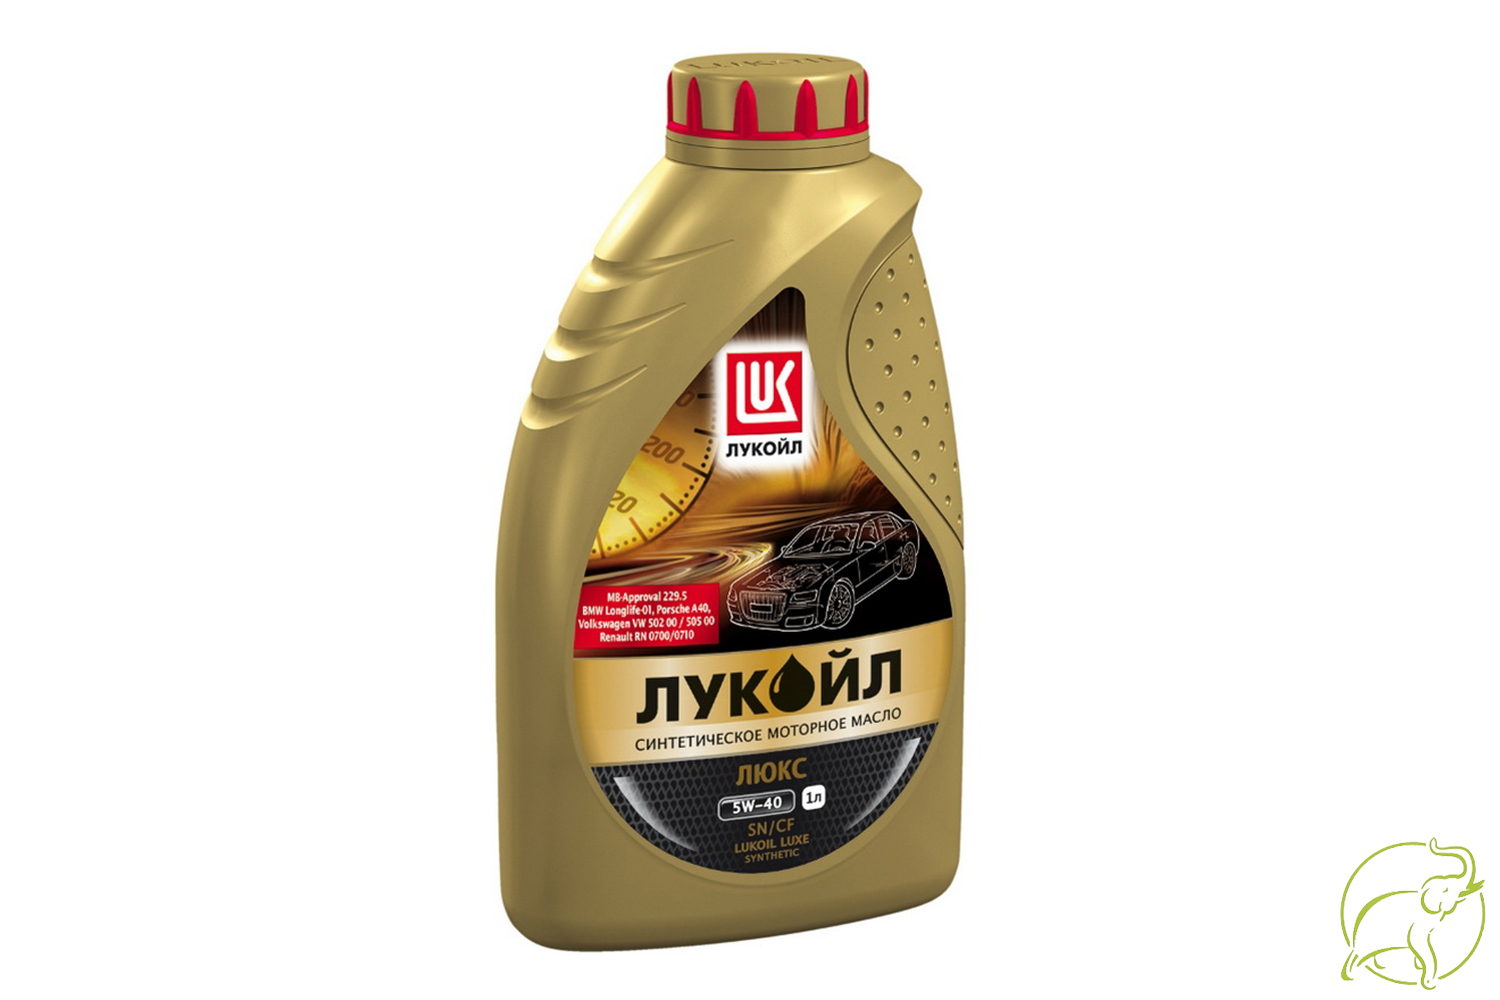 Масло Лукойл Люкс 1л синт 5w40. Lukoil Luxe, Synthetic SAE 5w-40, API SN/CF. Масло моторное Лукойл Люкс синтетическое SAE 5w-40 API SN/CF. Масло Лукойл Люкс моторное синтетич.SAE 5w40 1л. Масло лукойл 5 w 40